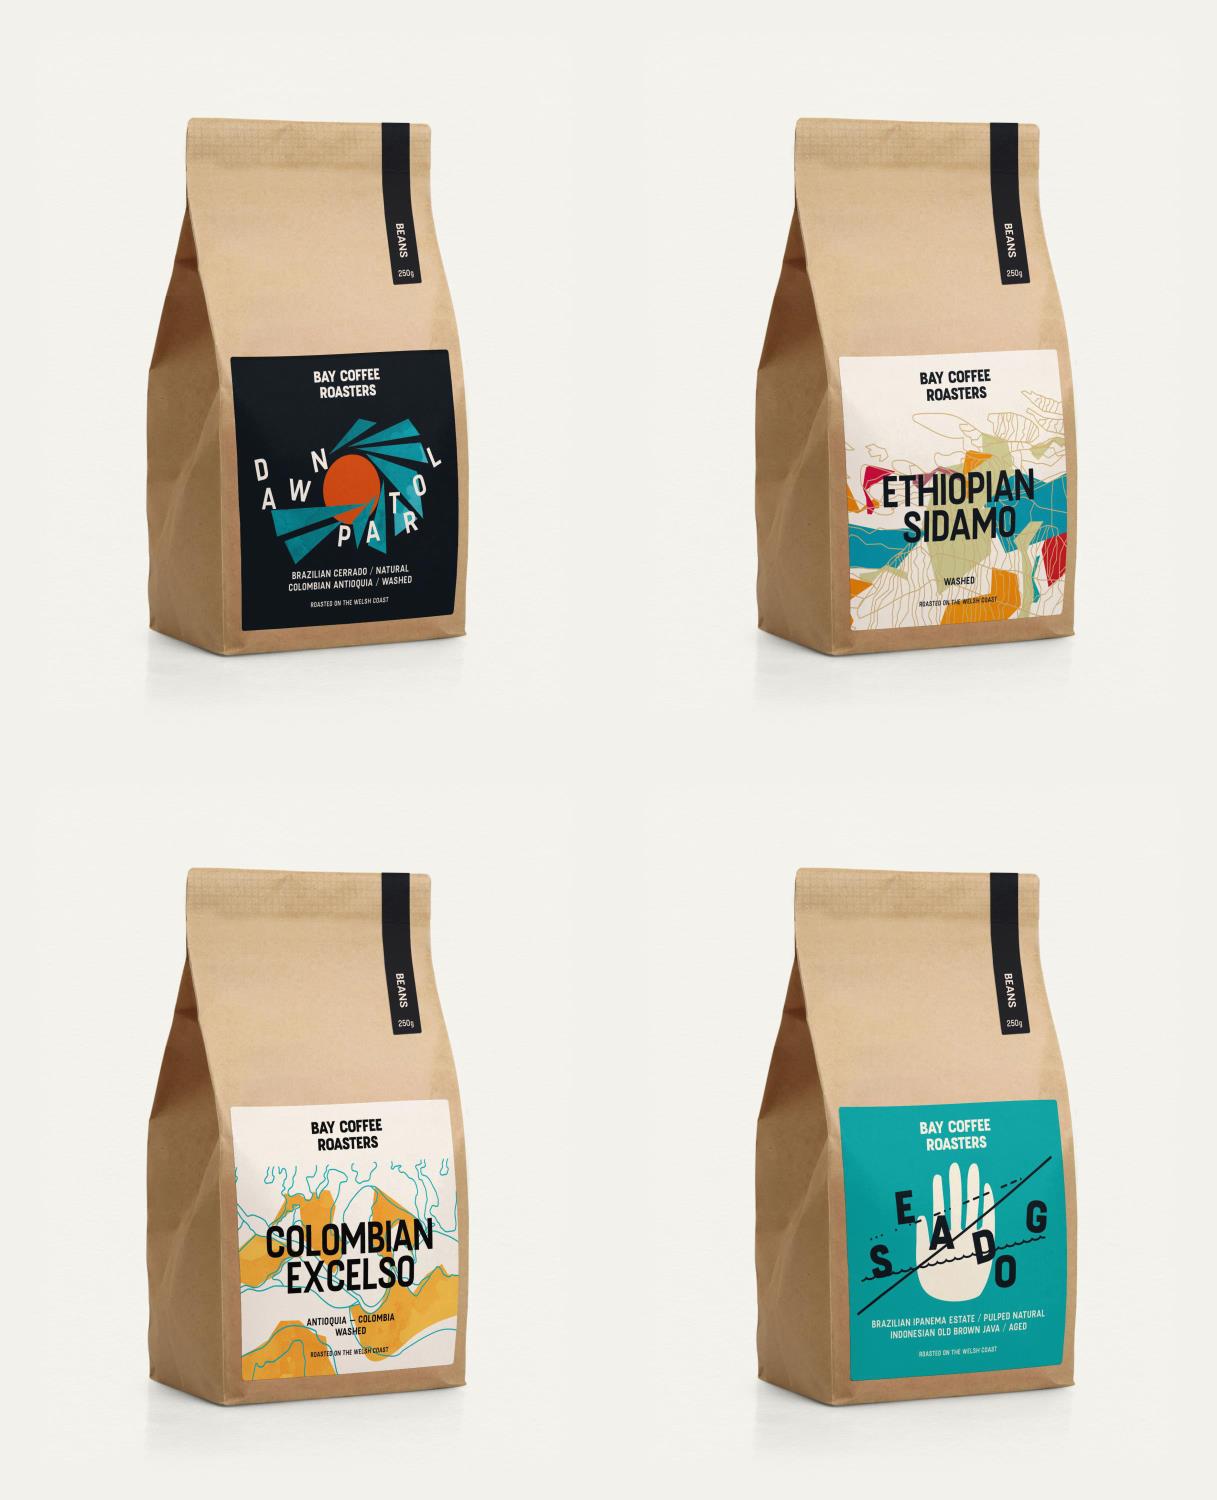 Four Bay Coffee Roasts for under £20